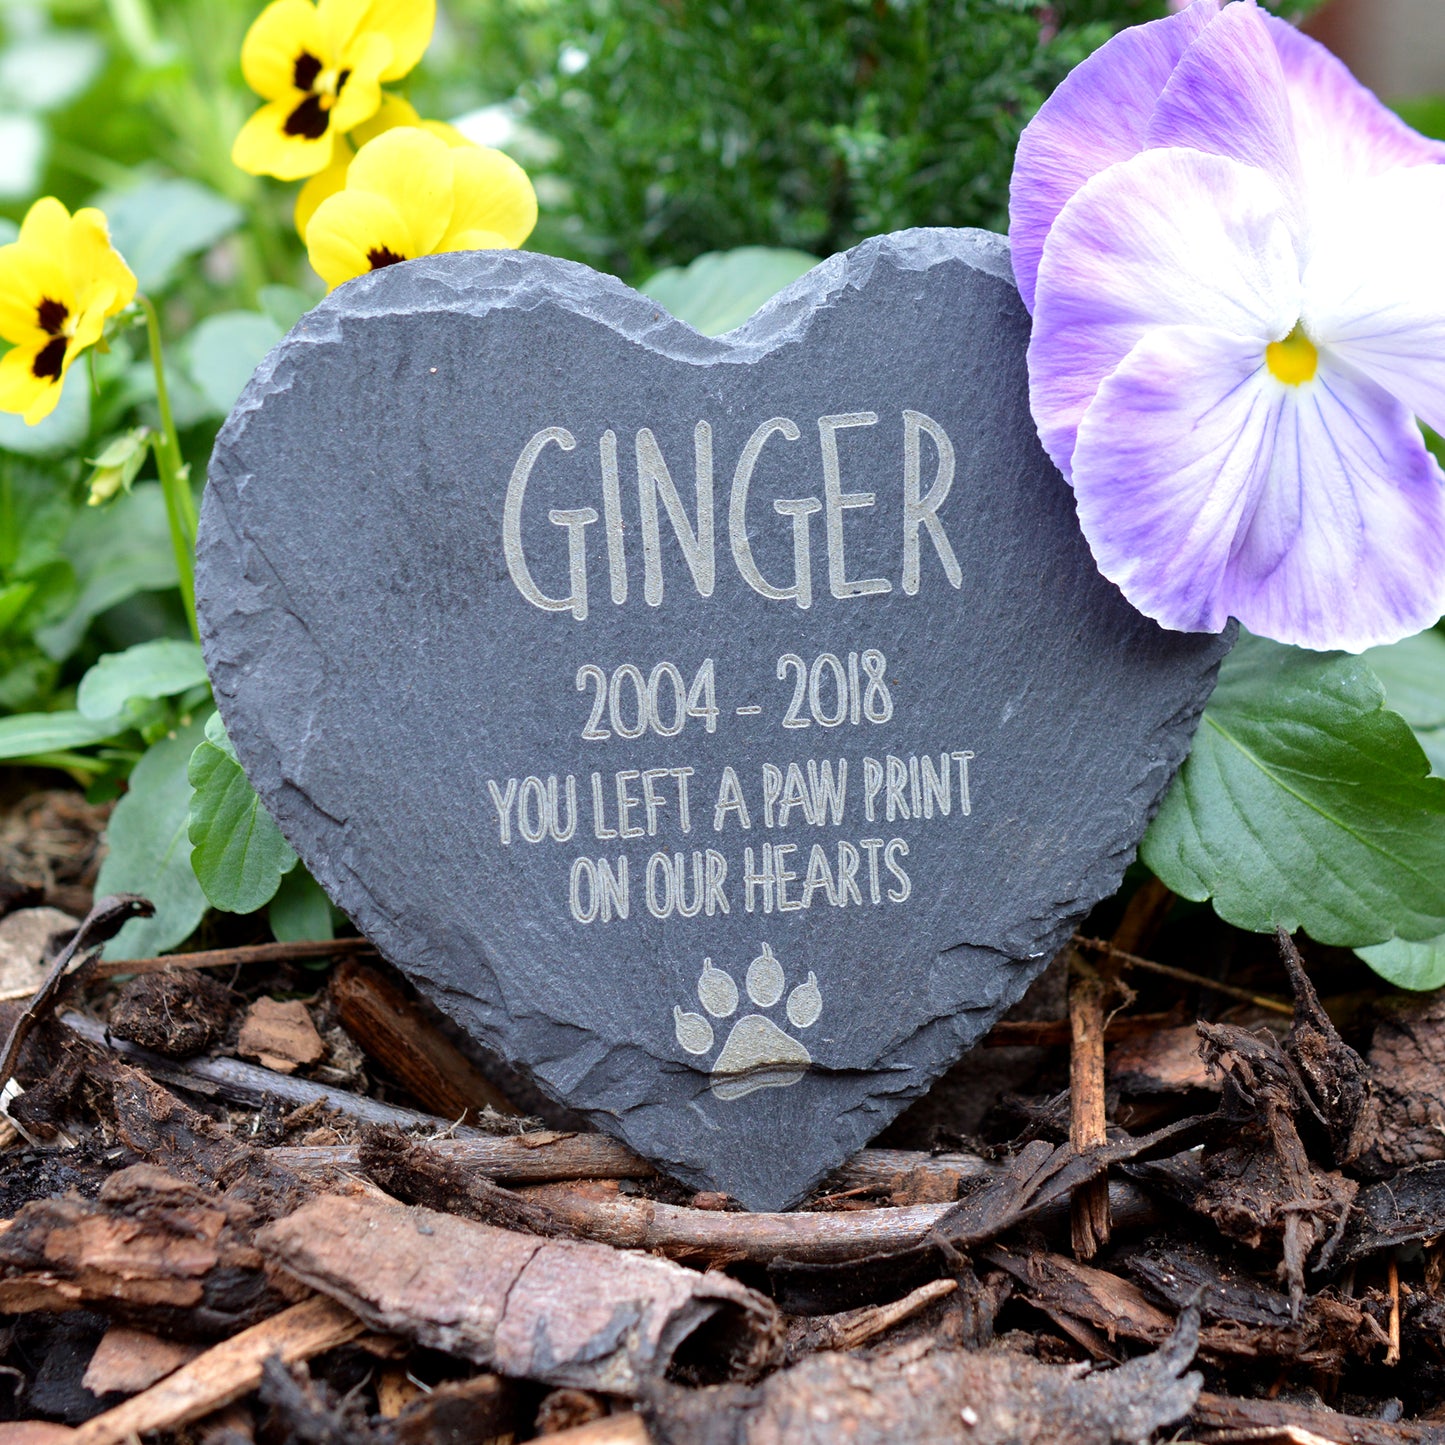 Memorial Plaque For Pet Cat - Personalised Cats Grave Stone Personalized Heart Slate Marker